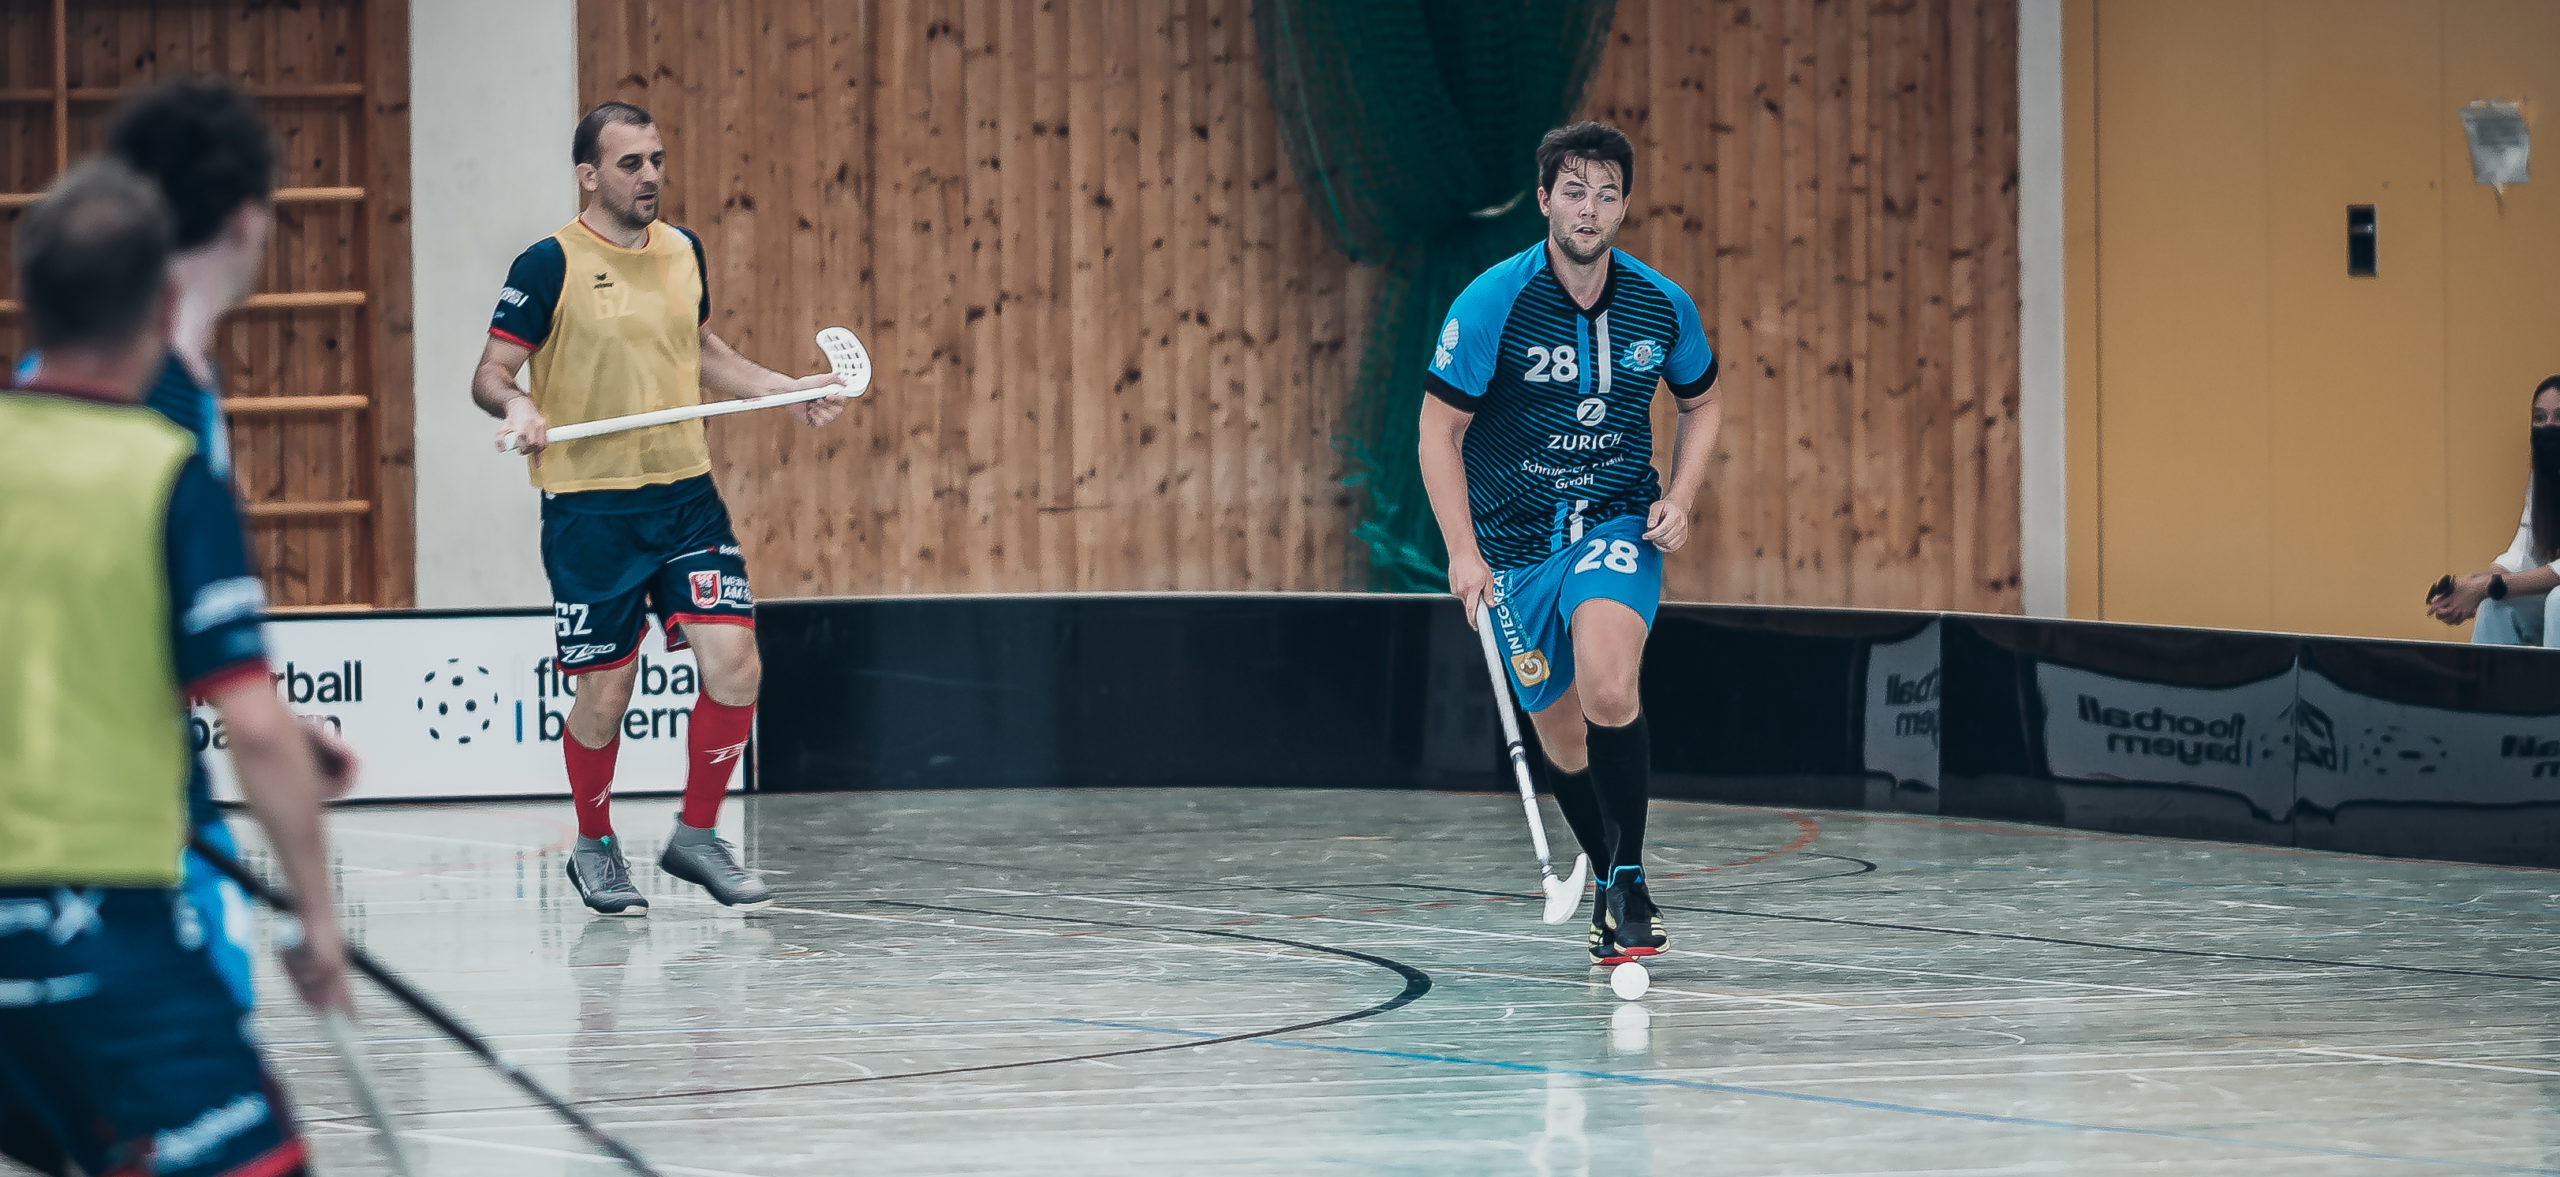 Floorball: Competition during the German Regional League seasonal event. 2560x1180 Dual Screen Wallpaper.